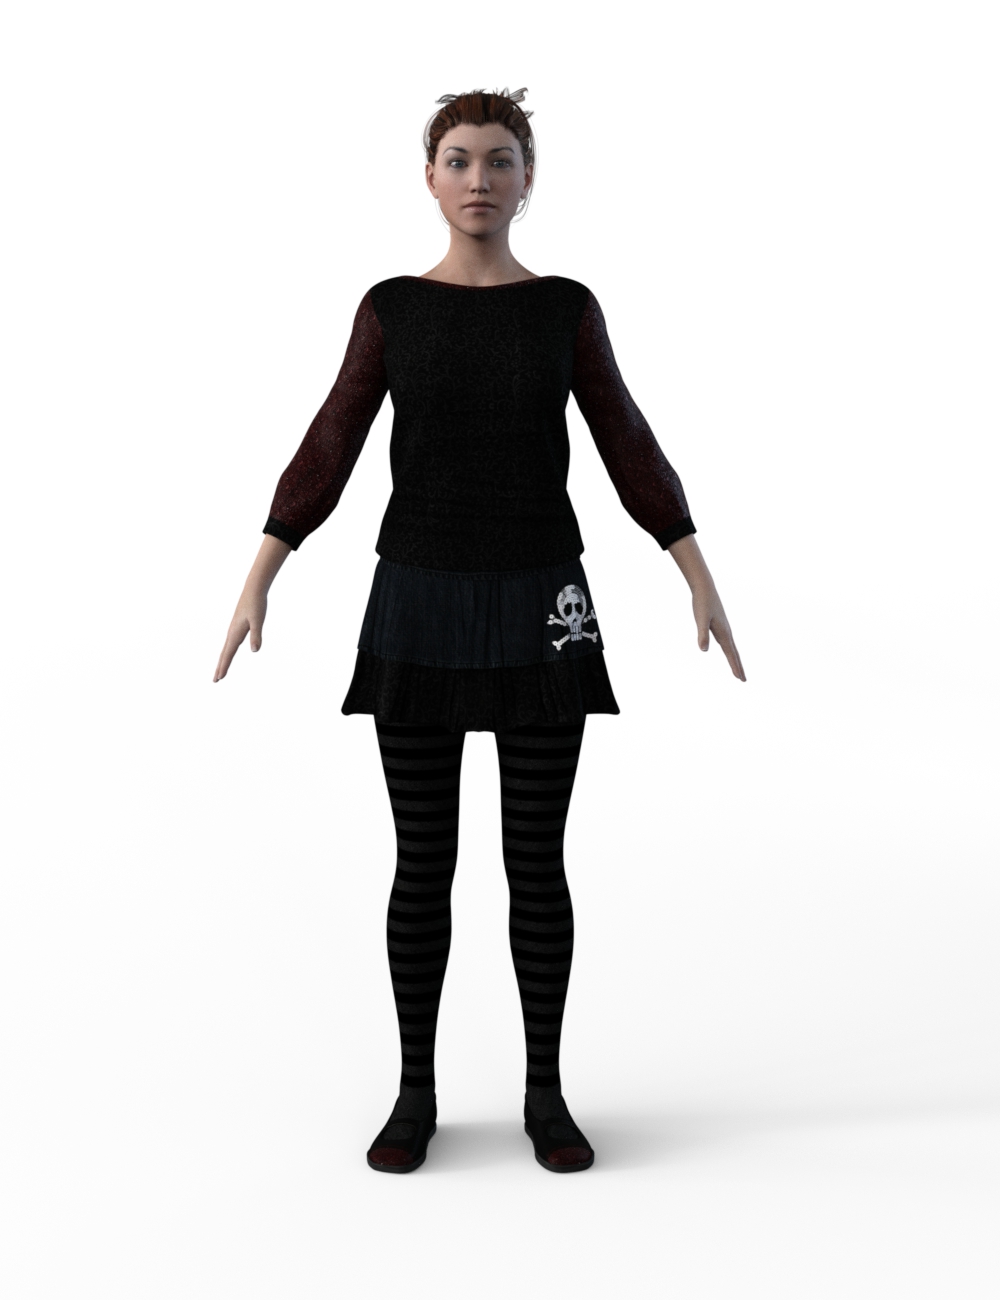 FBX- Base Female Childs Play Outfit by: Paleo, 3D Models by Daz 3D